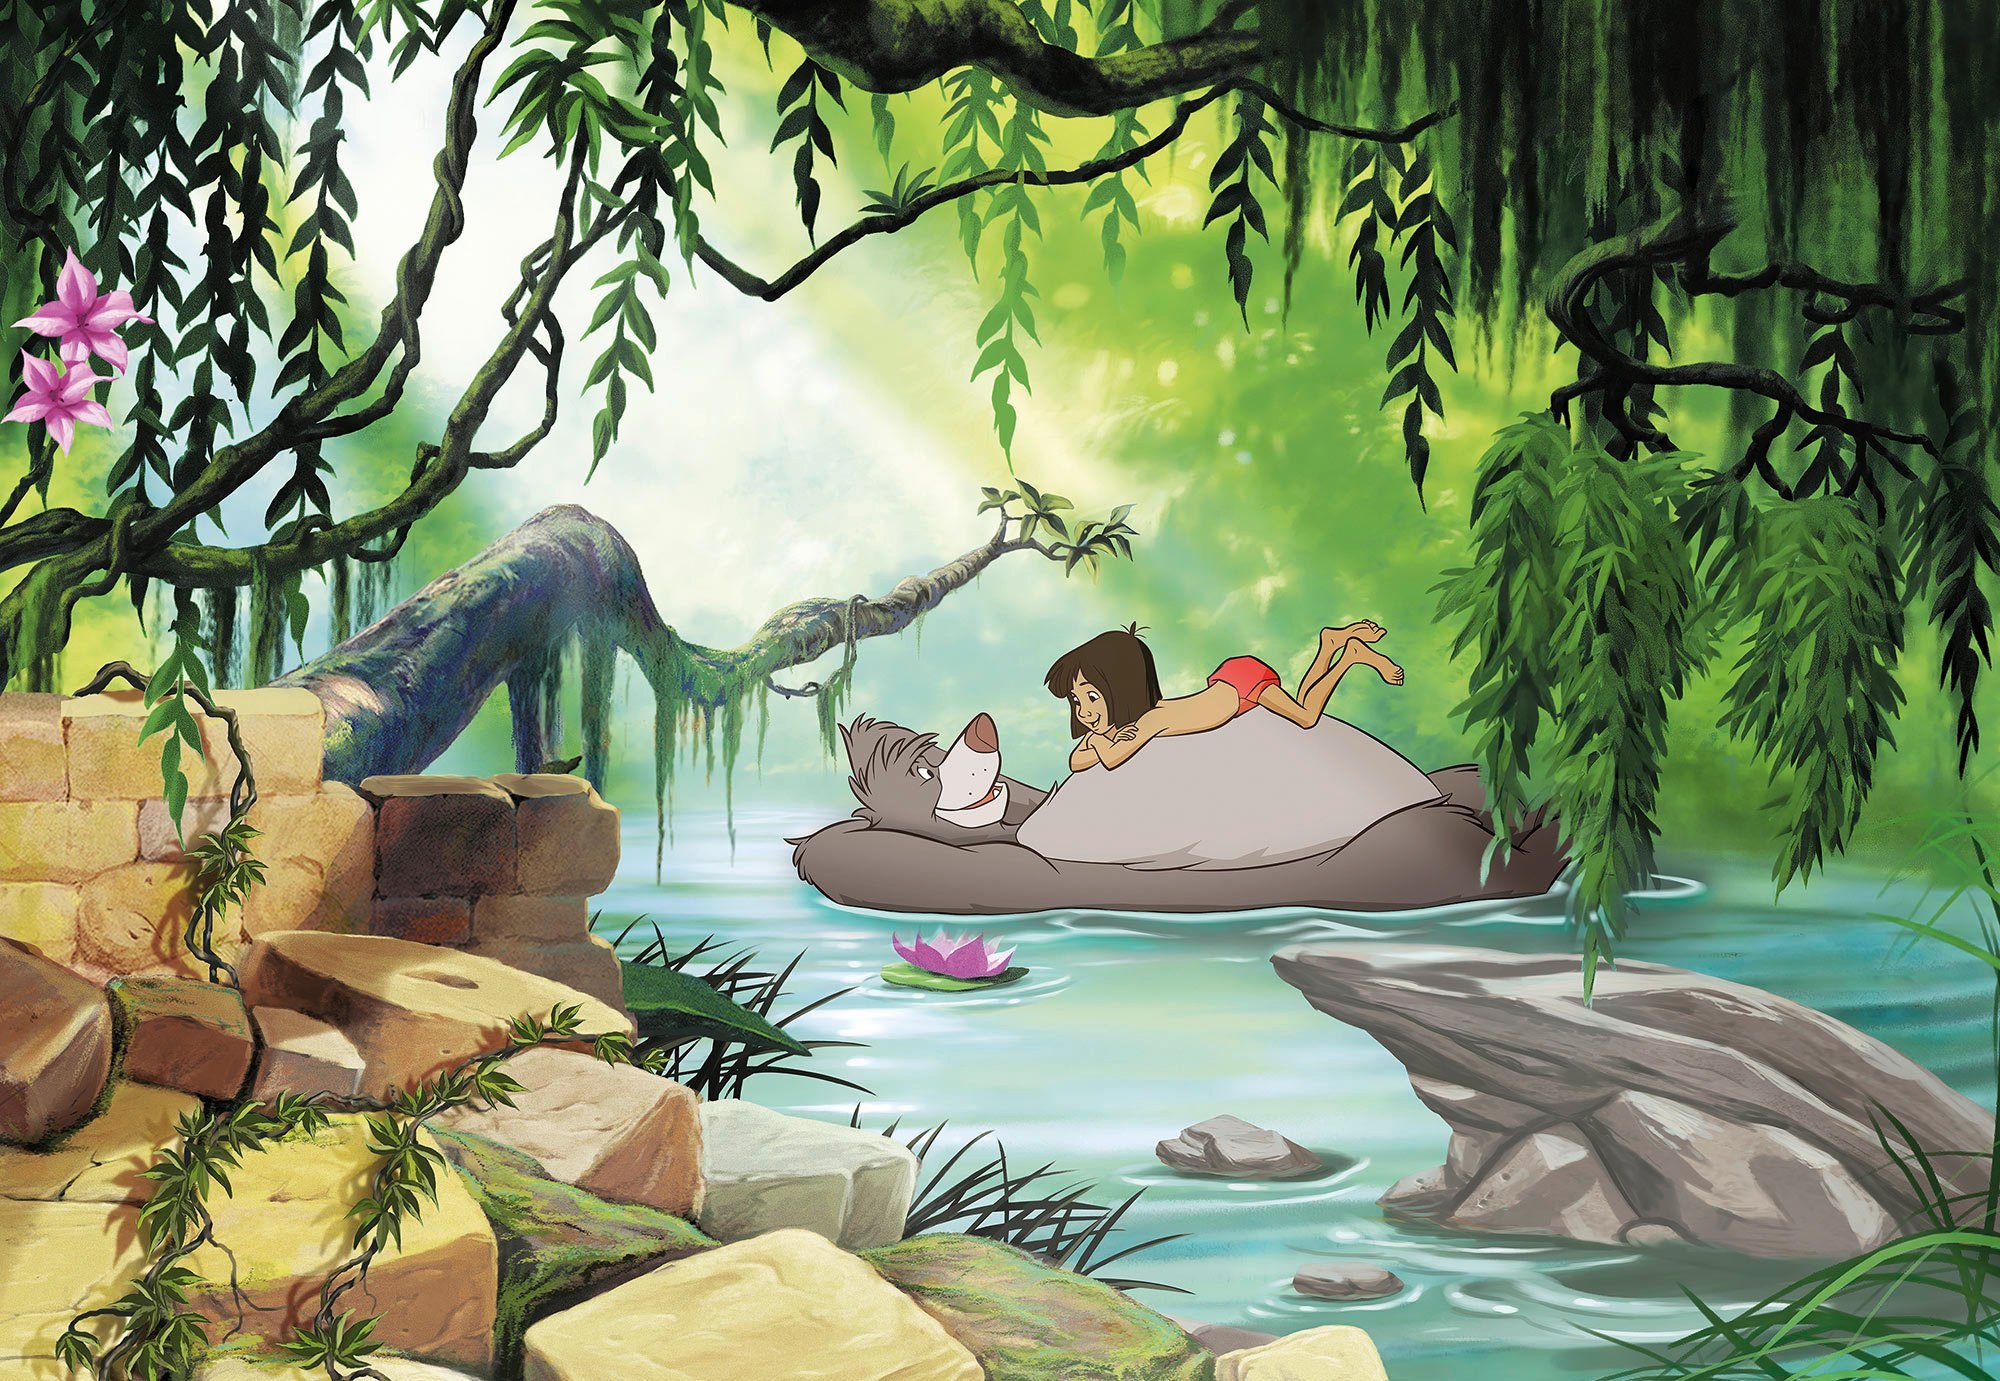 Komar Fototapete Jungle book swimming with Baloo, (Packung, 1 St), 368x254  cm (Breite x Höhe)